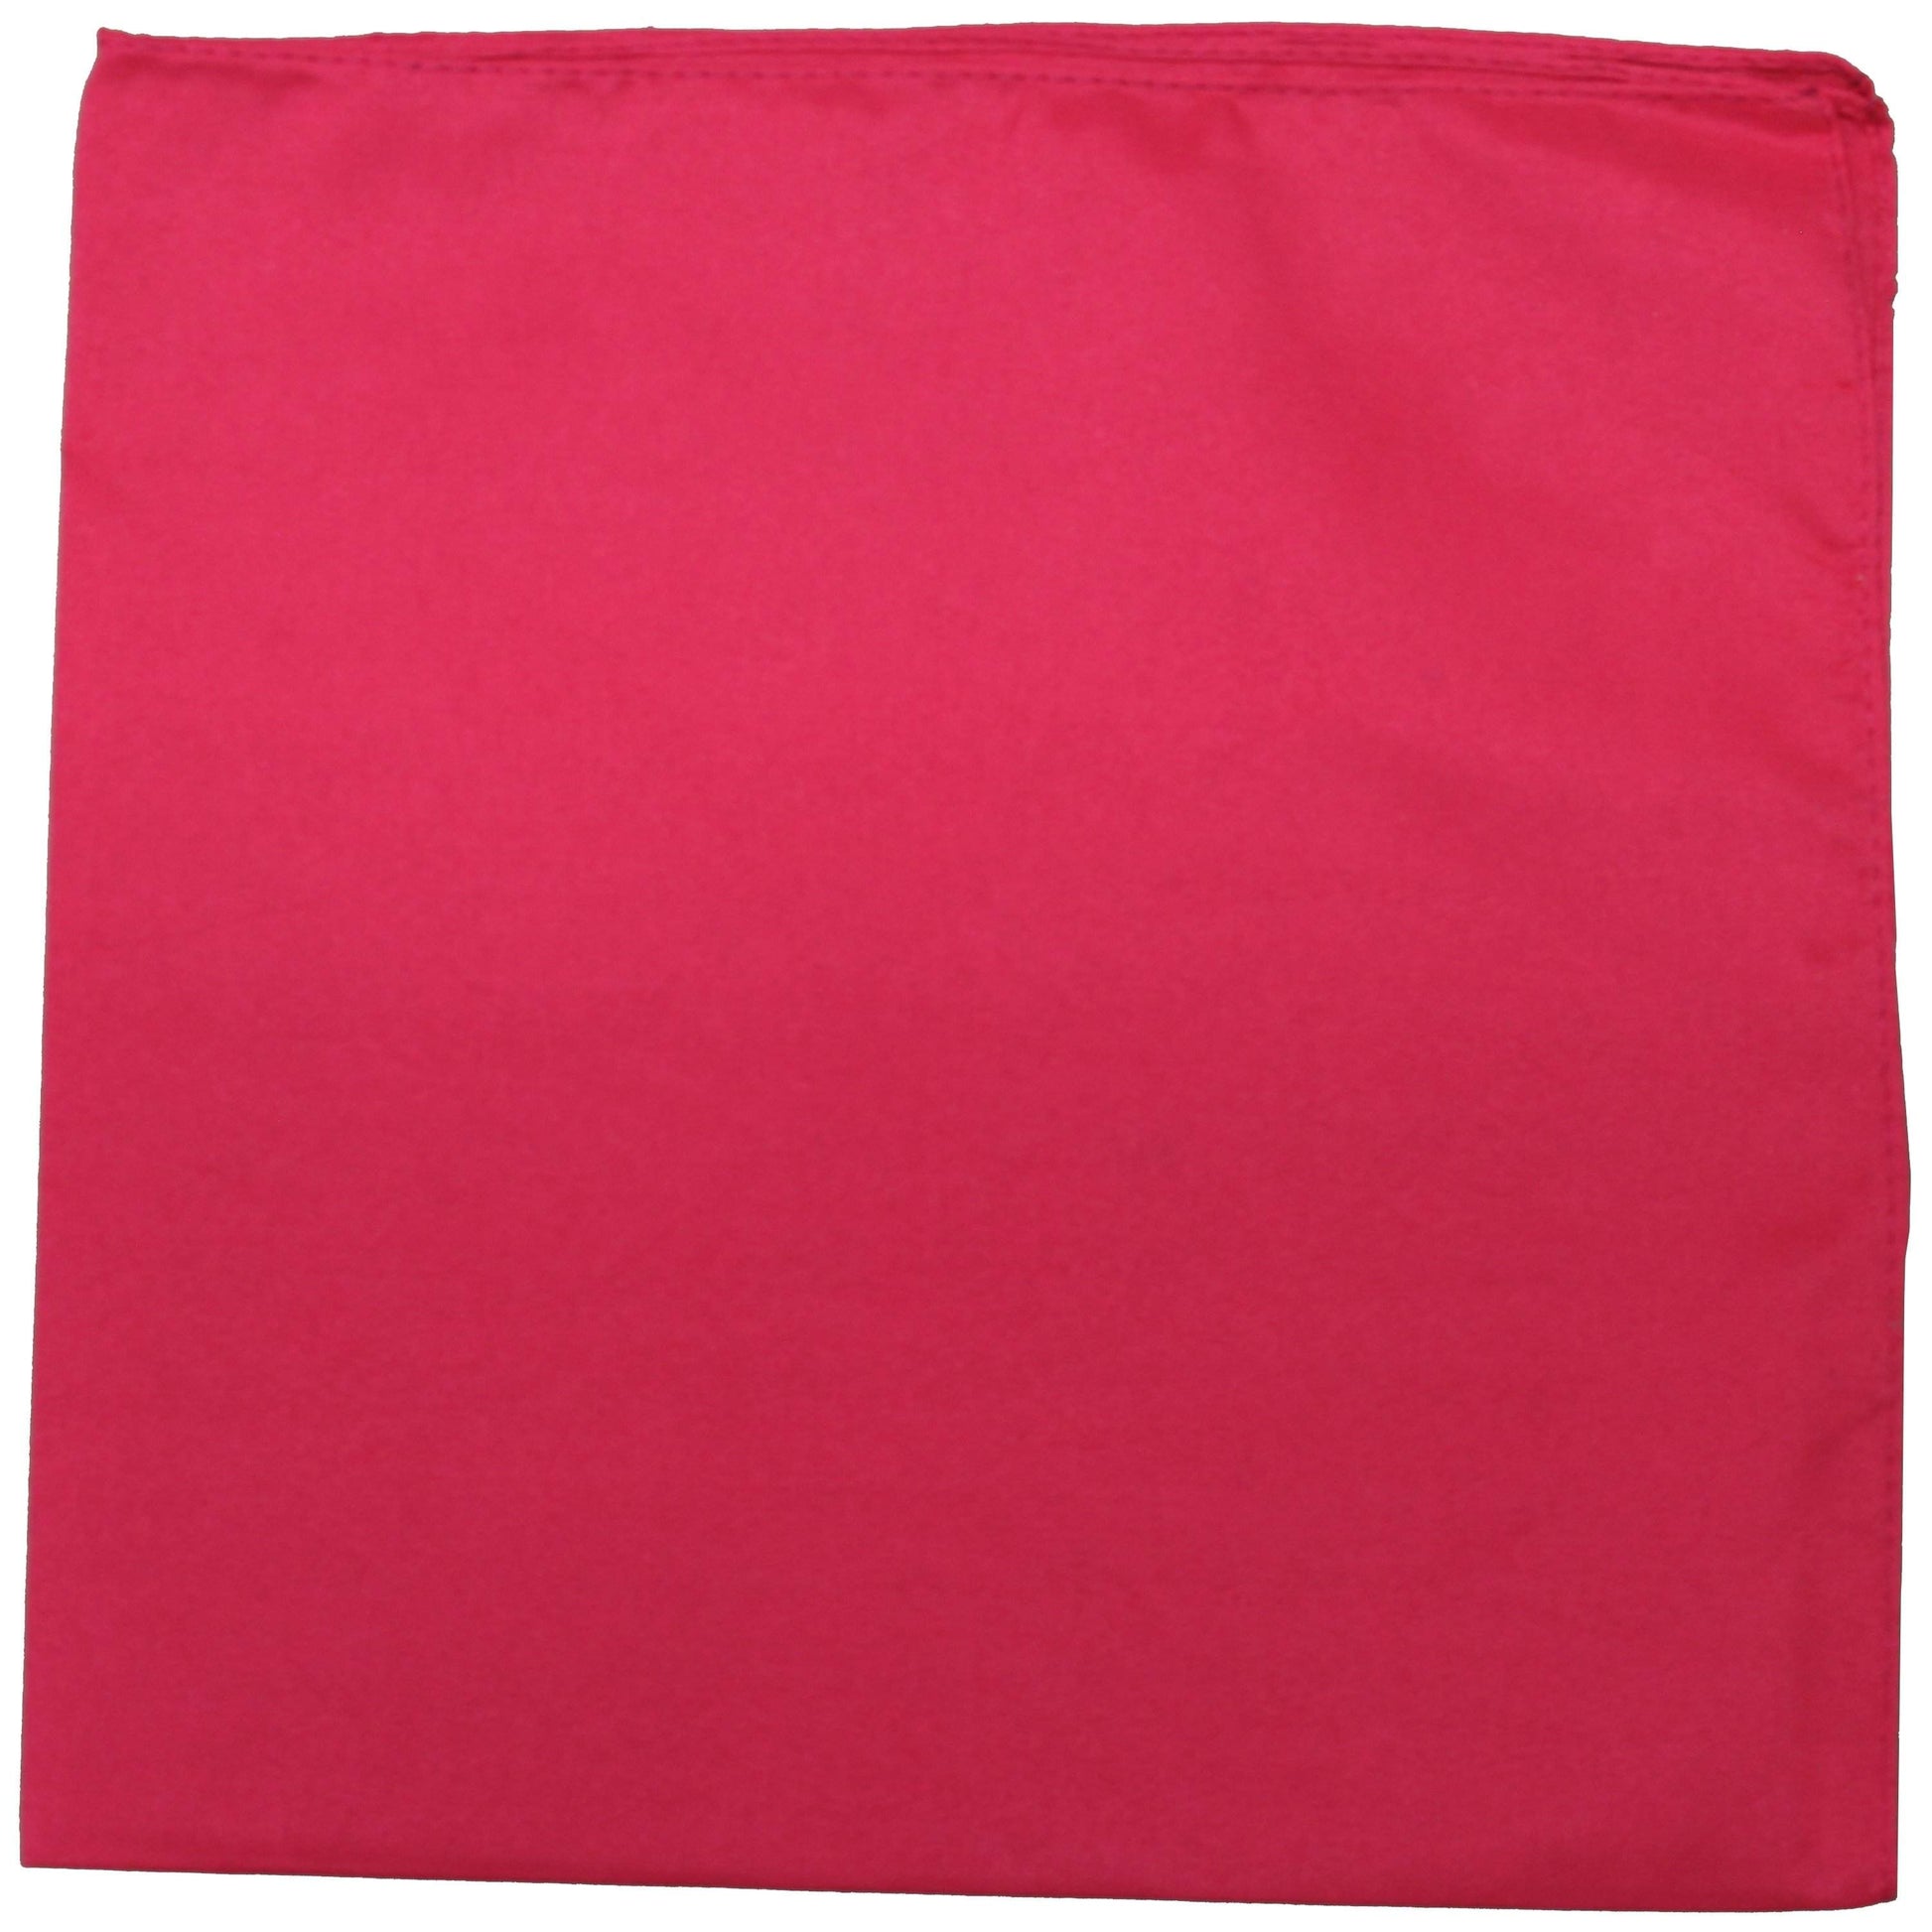 9 Pack Extra Large Cotton Plain Bandanas 27 x 27 Inches - Party and Decoration - Bulk